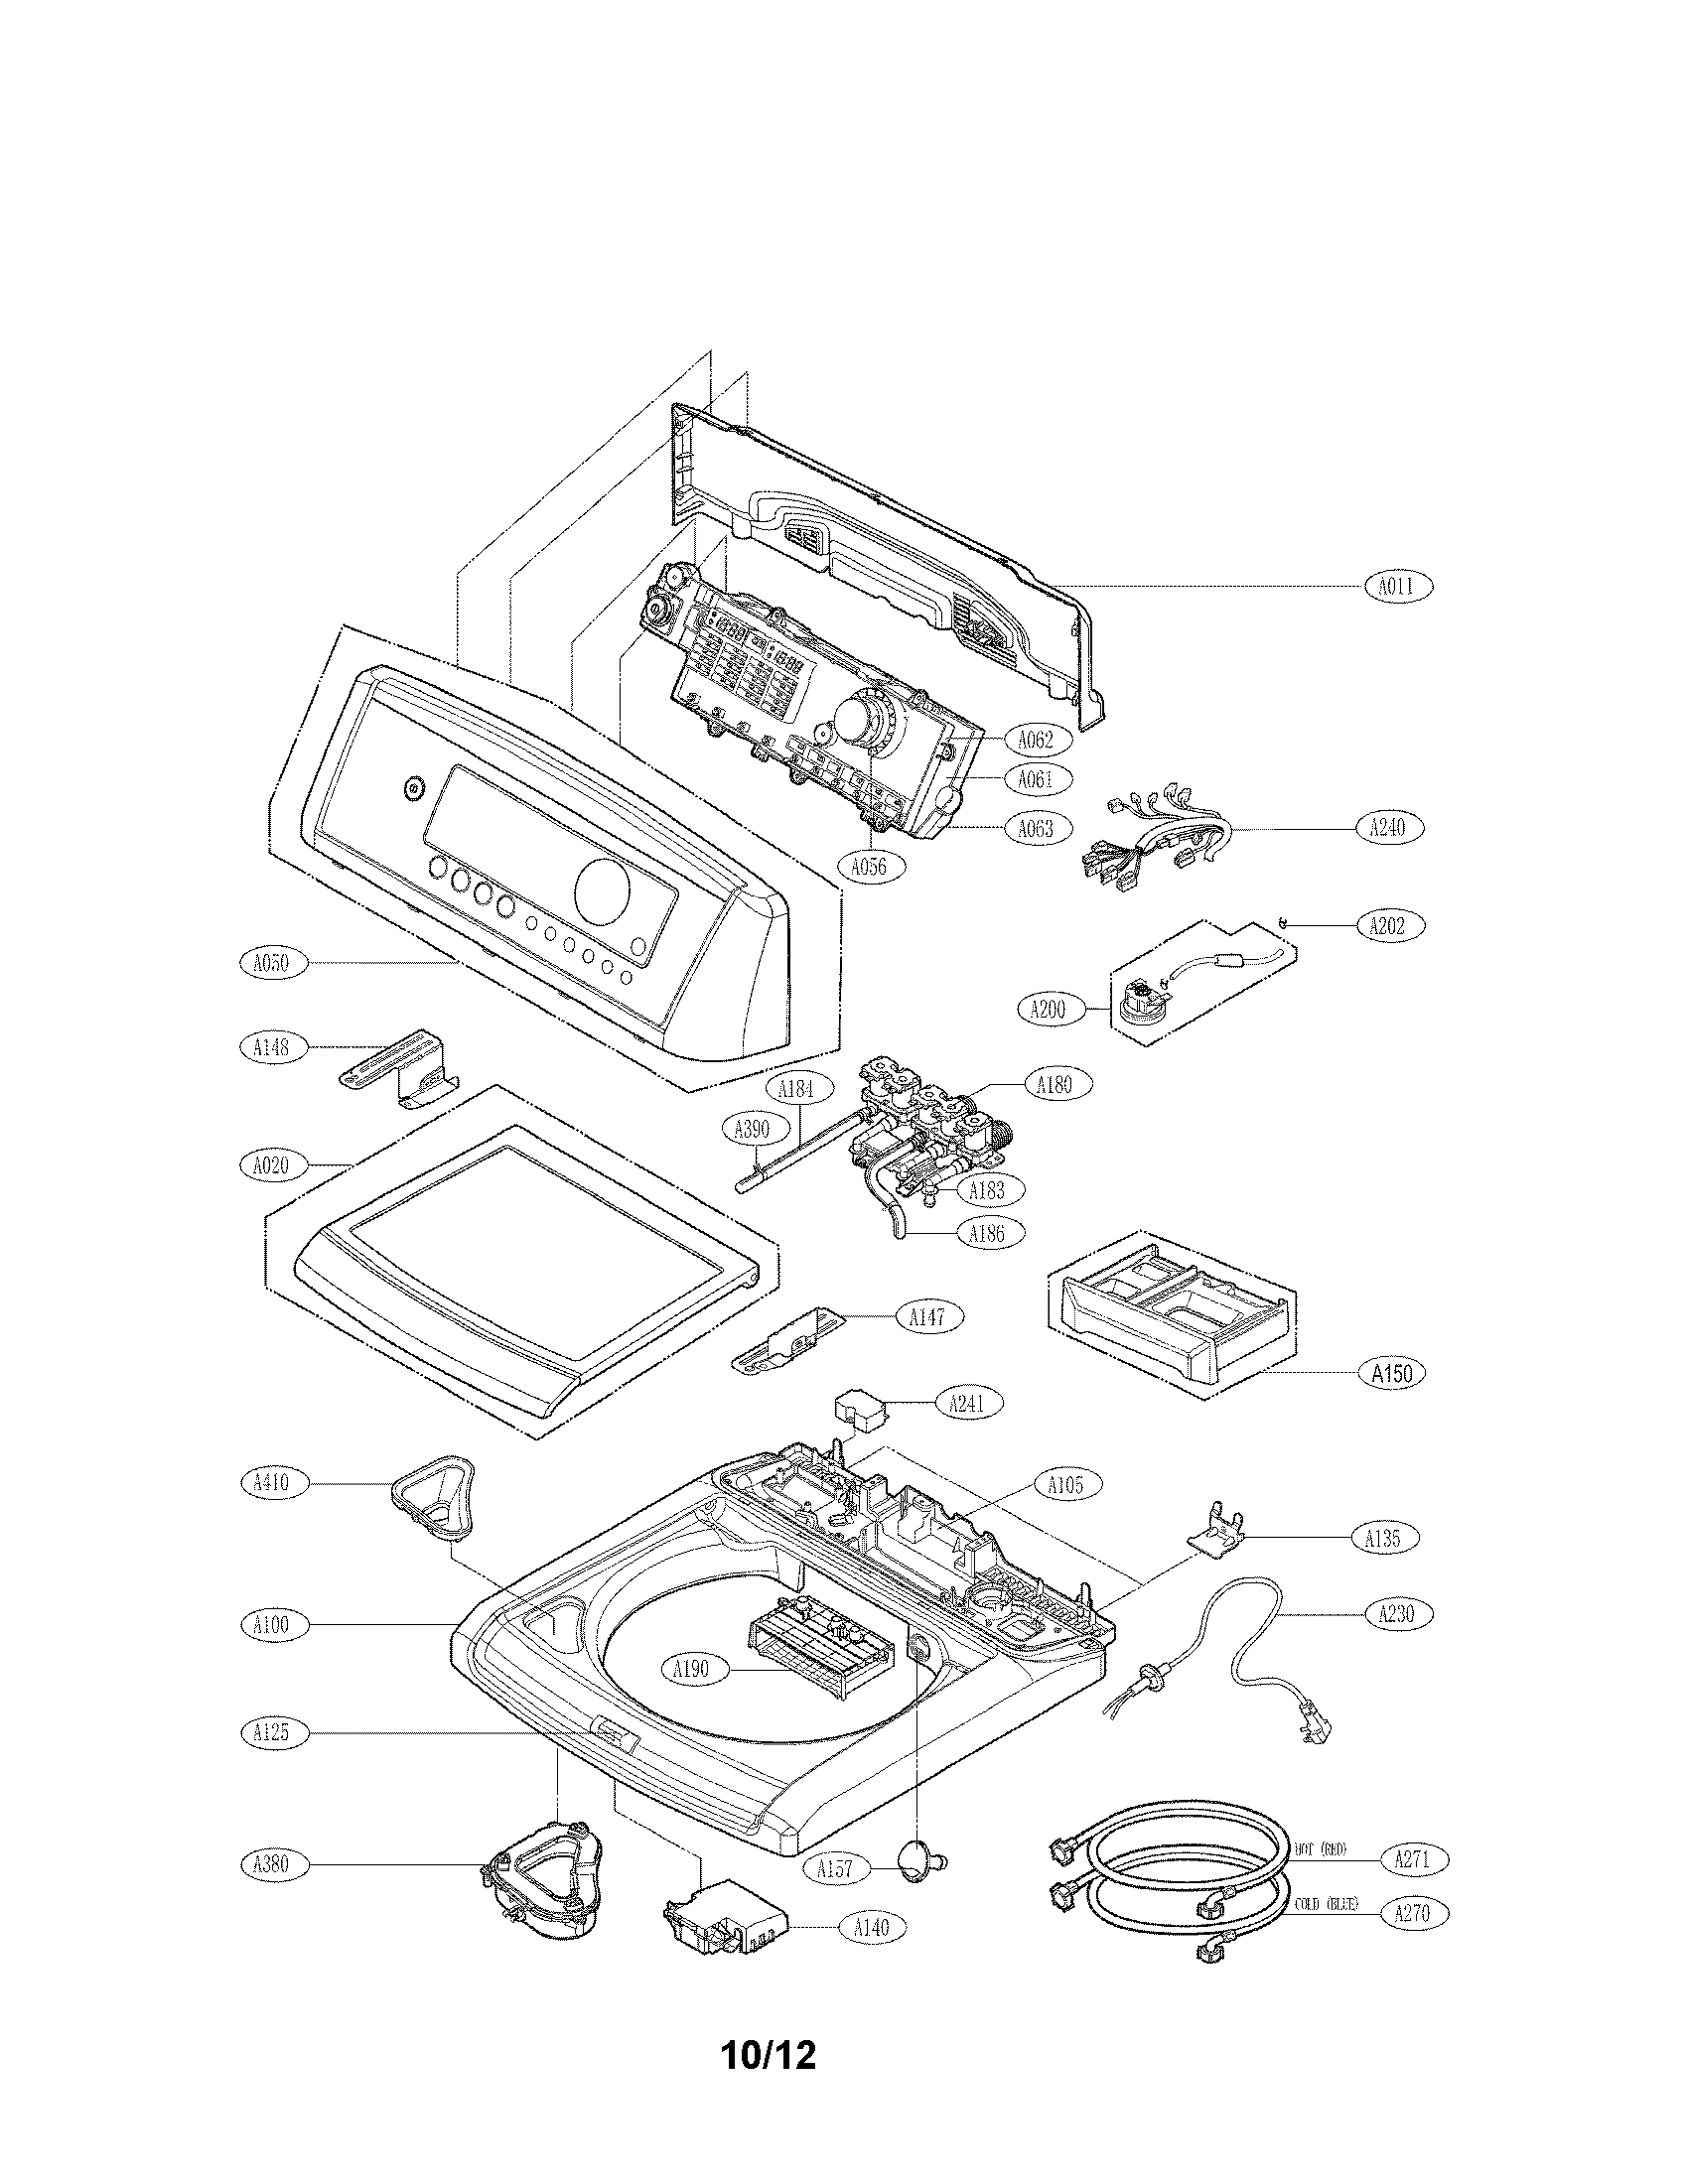 Lg Washer Parts